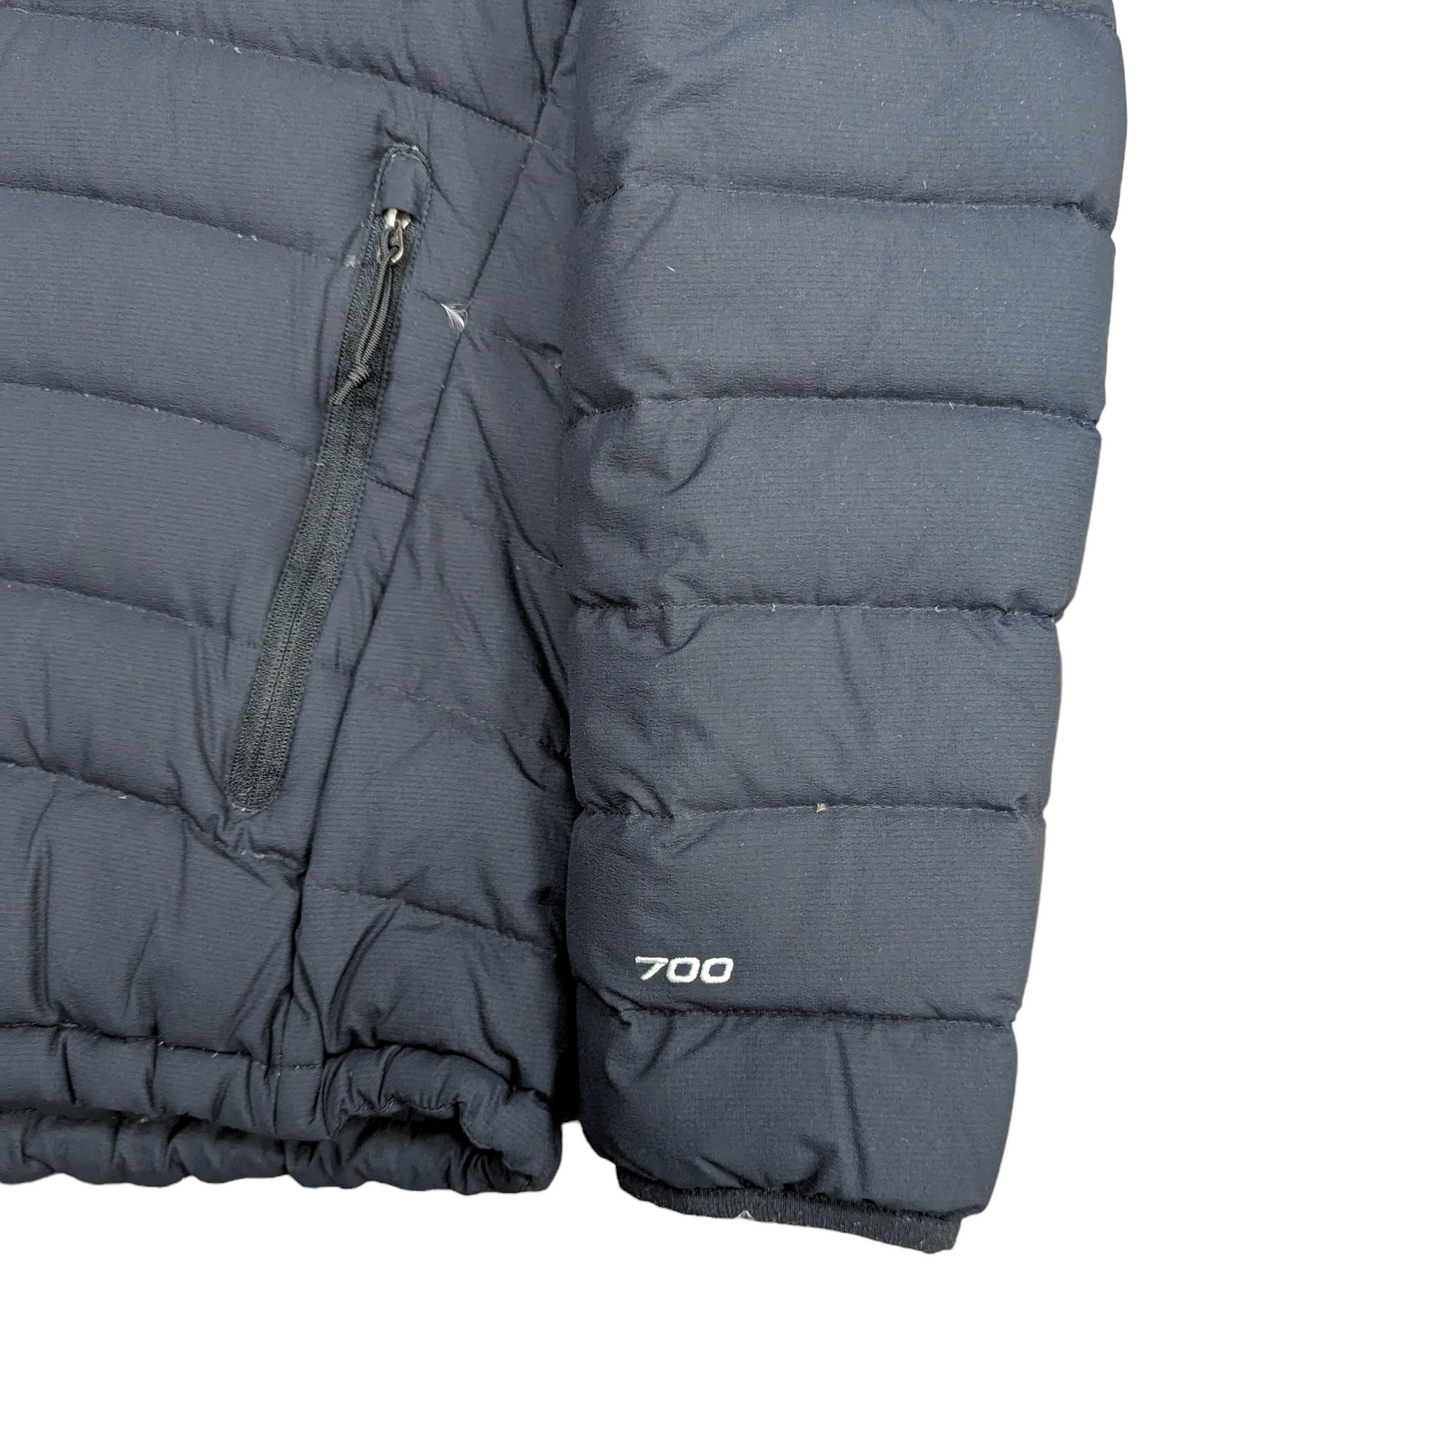 The North Face 700 Down Jacket Women’s Size L